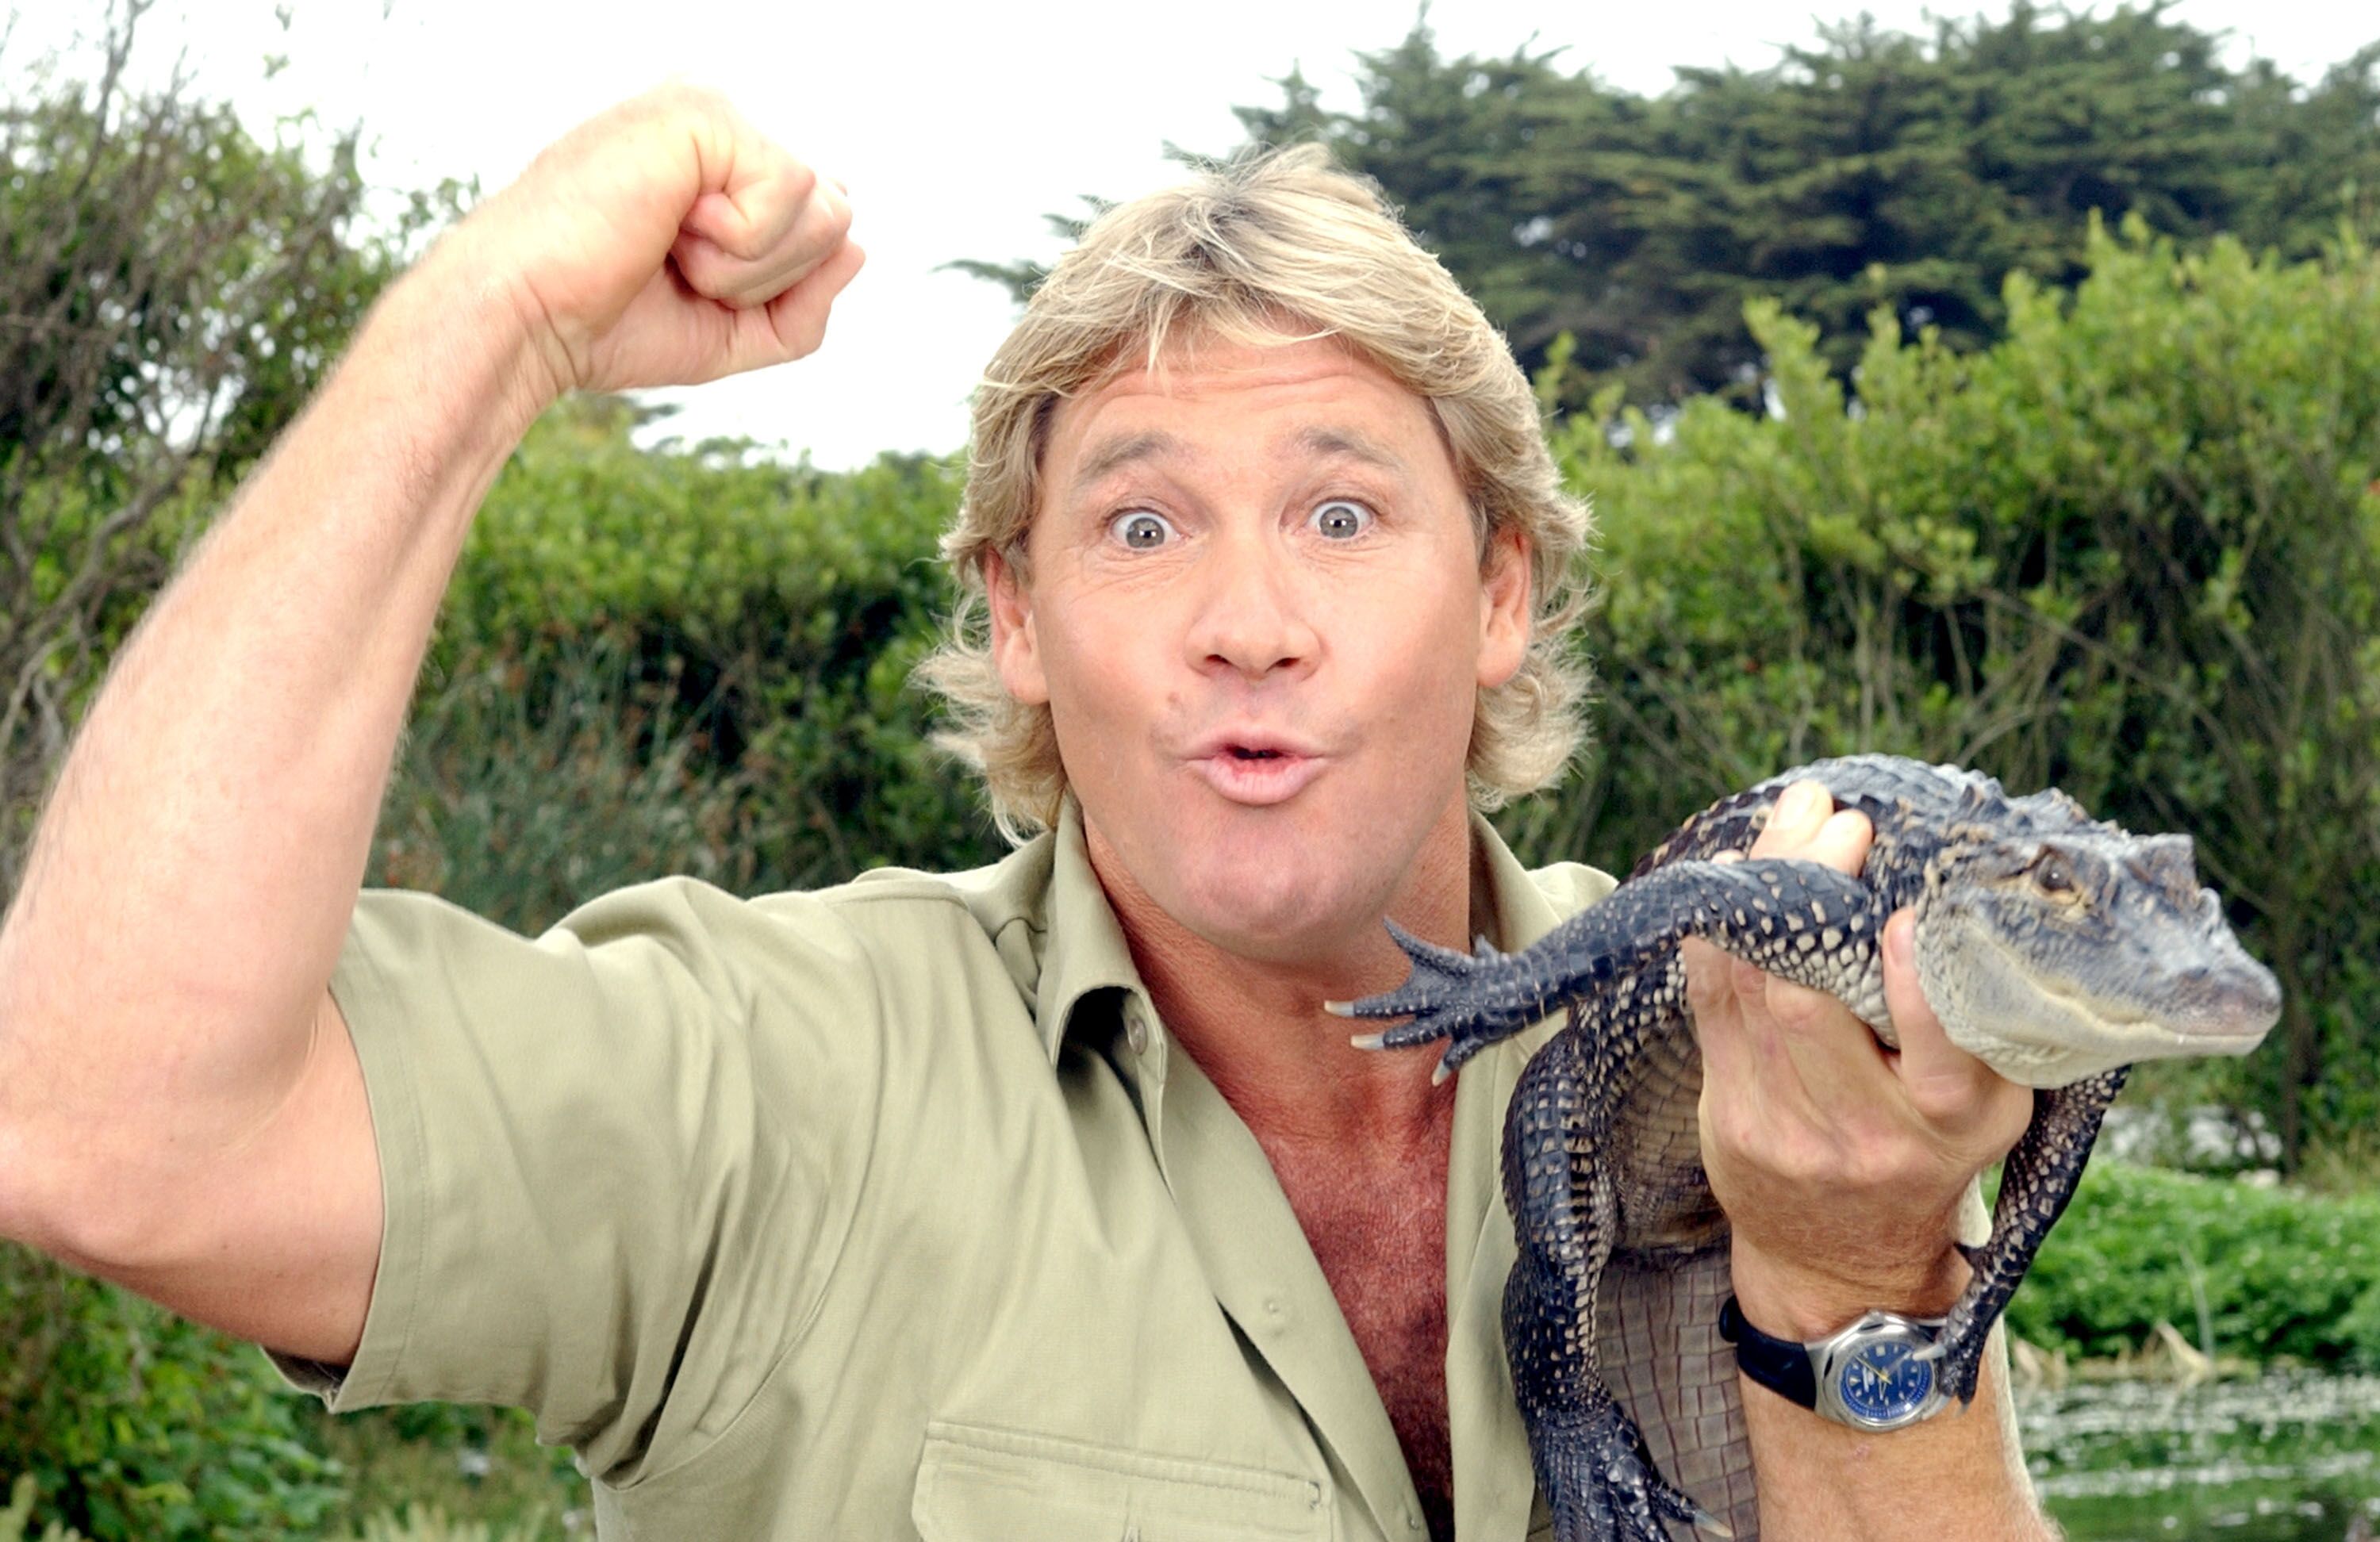 Steve Irwin, poses with a three foot long alligator at the San Francisco Zoo on June 26, 2002 in San Francisco, California | Photo: Getty Images